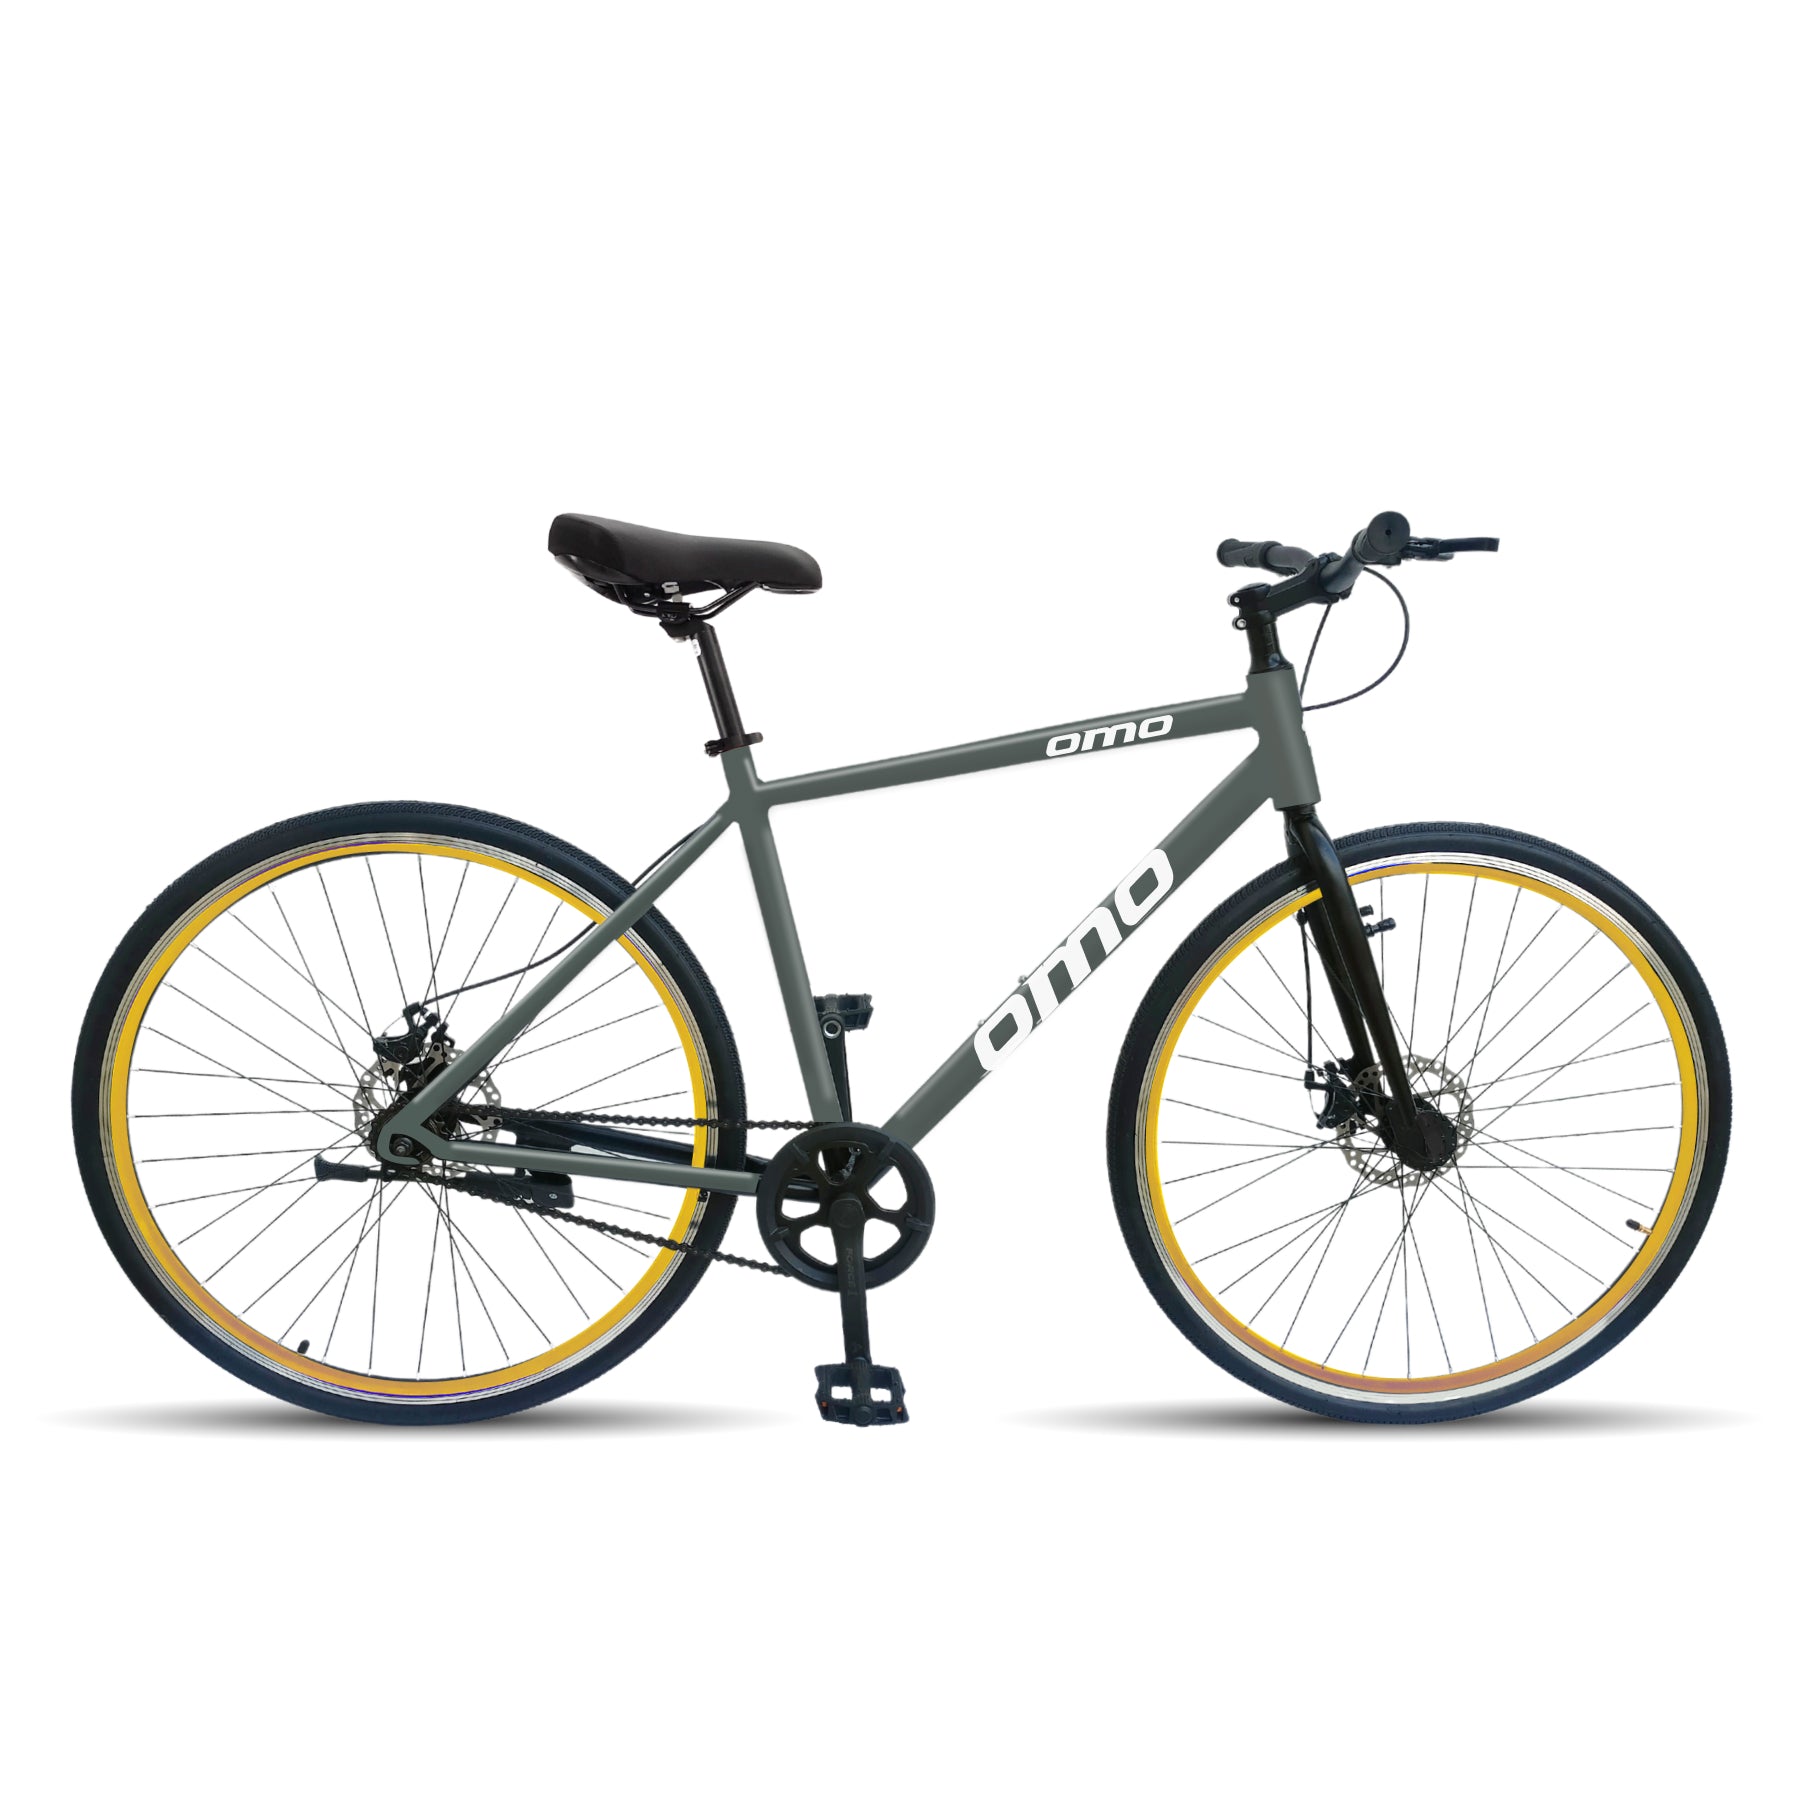 Omobikes hampi 700 alloy frame hybrid bike single speed without gear full sideview GREY FRAME YELLOW RIM 